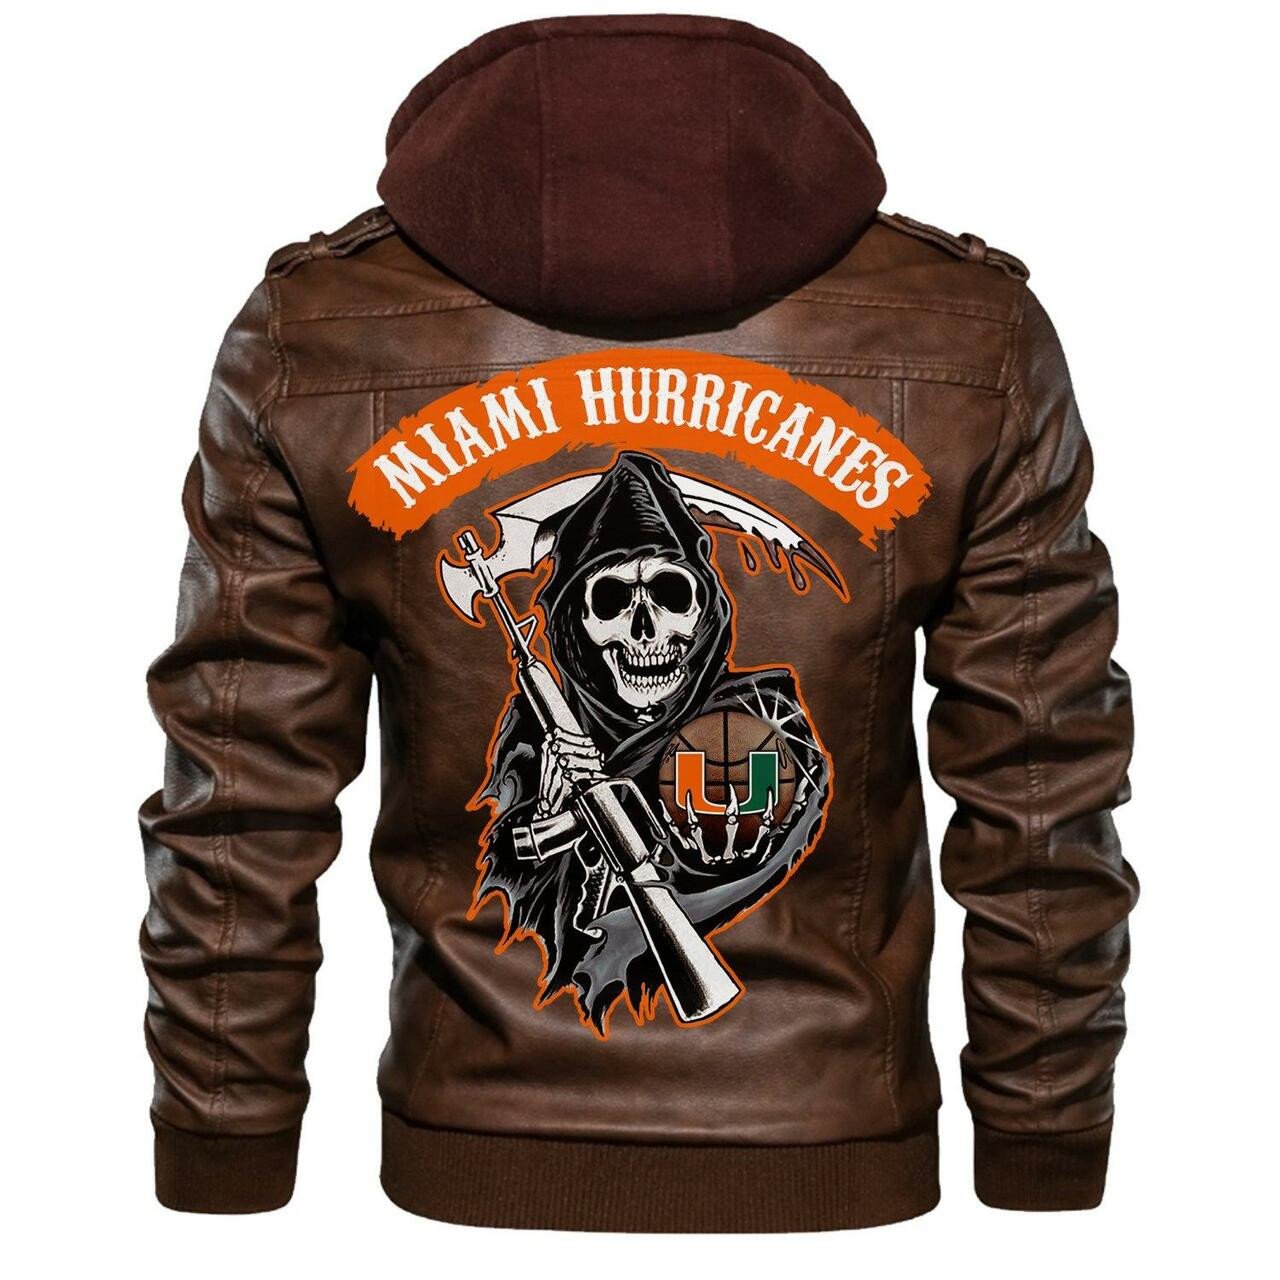 Our store has all of the latest leather jacket 34